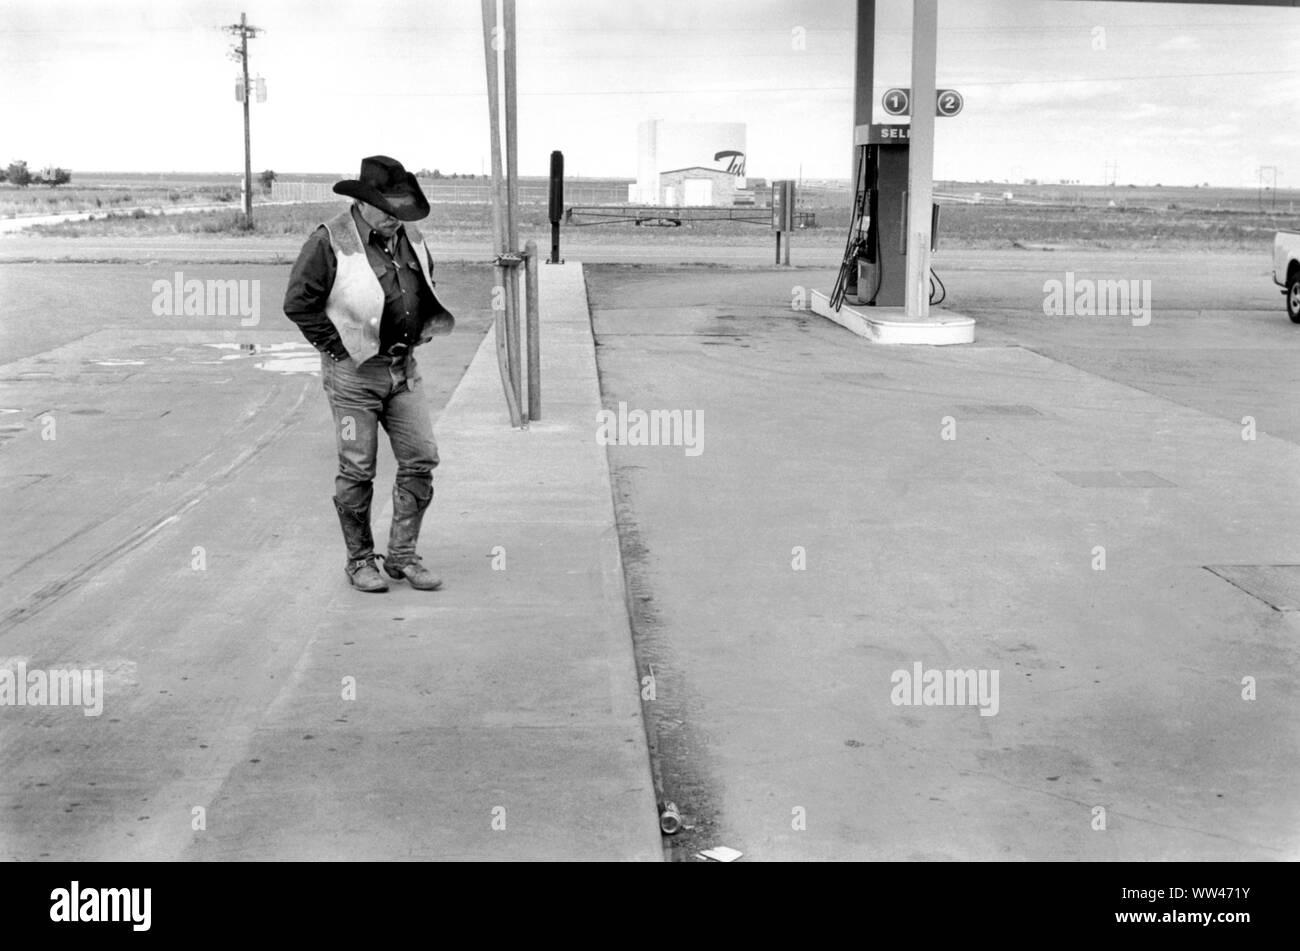 Cowboy 1990s Denton Texas. Lone ranger in his State Hat of Texas, a Ten-gallon hat  and cowboy boots and typical clothing of a ranch worker walking across the forecourt at a petrol gas station 1999 US USA HOMER SYKES Stock Photo